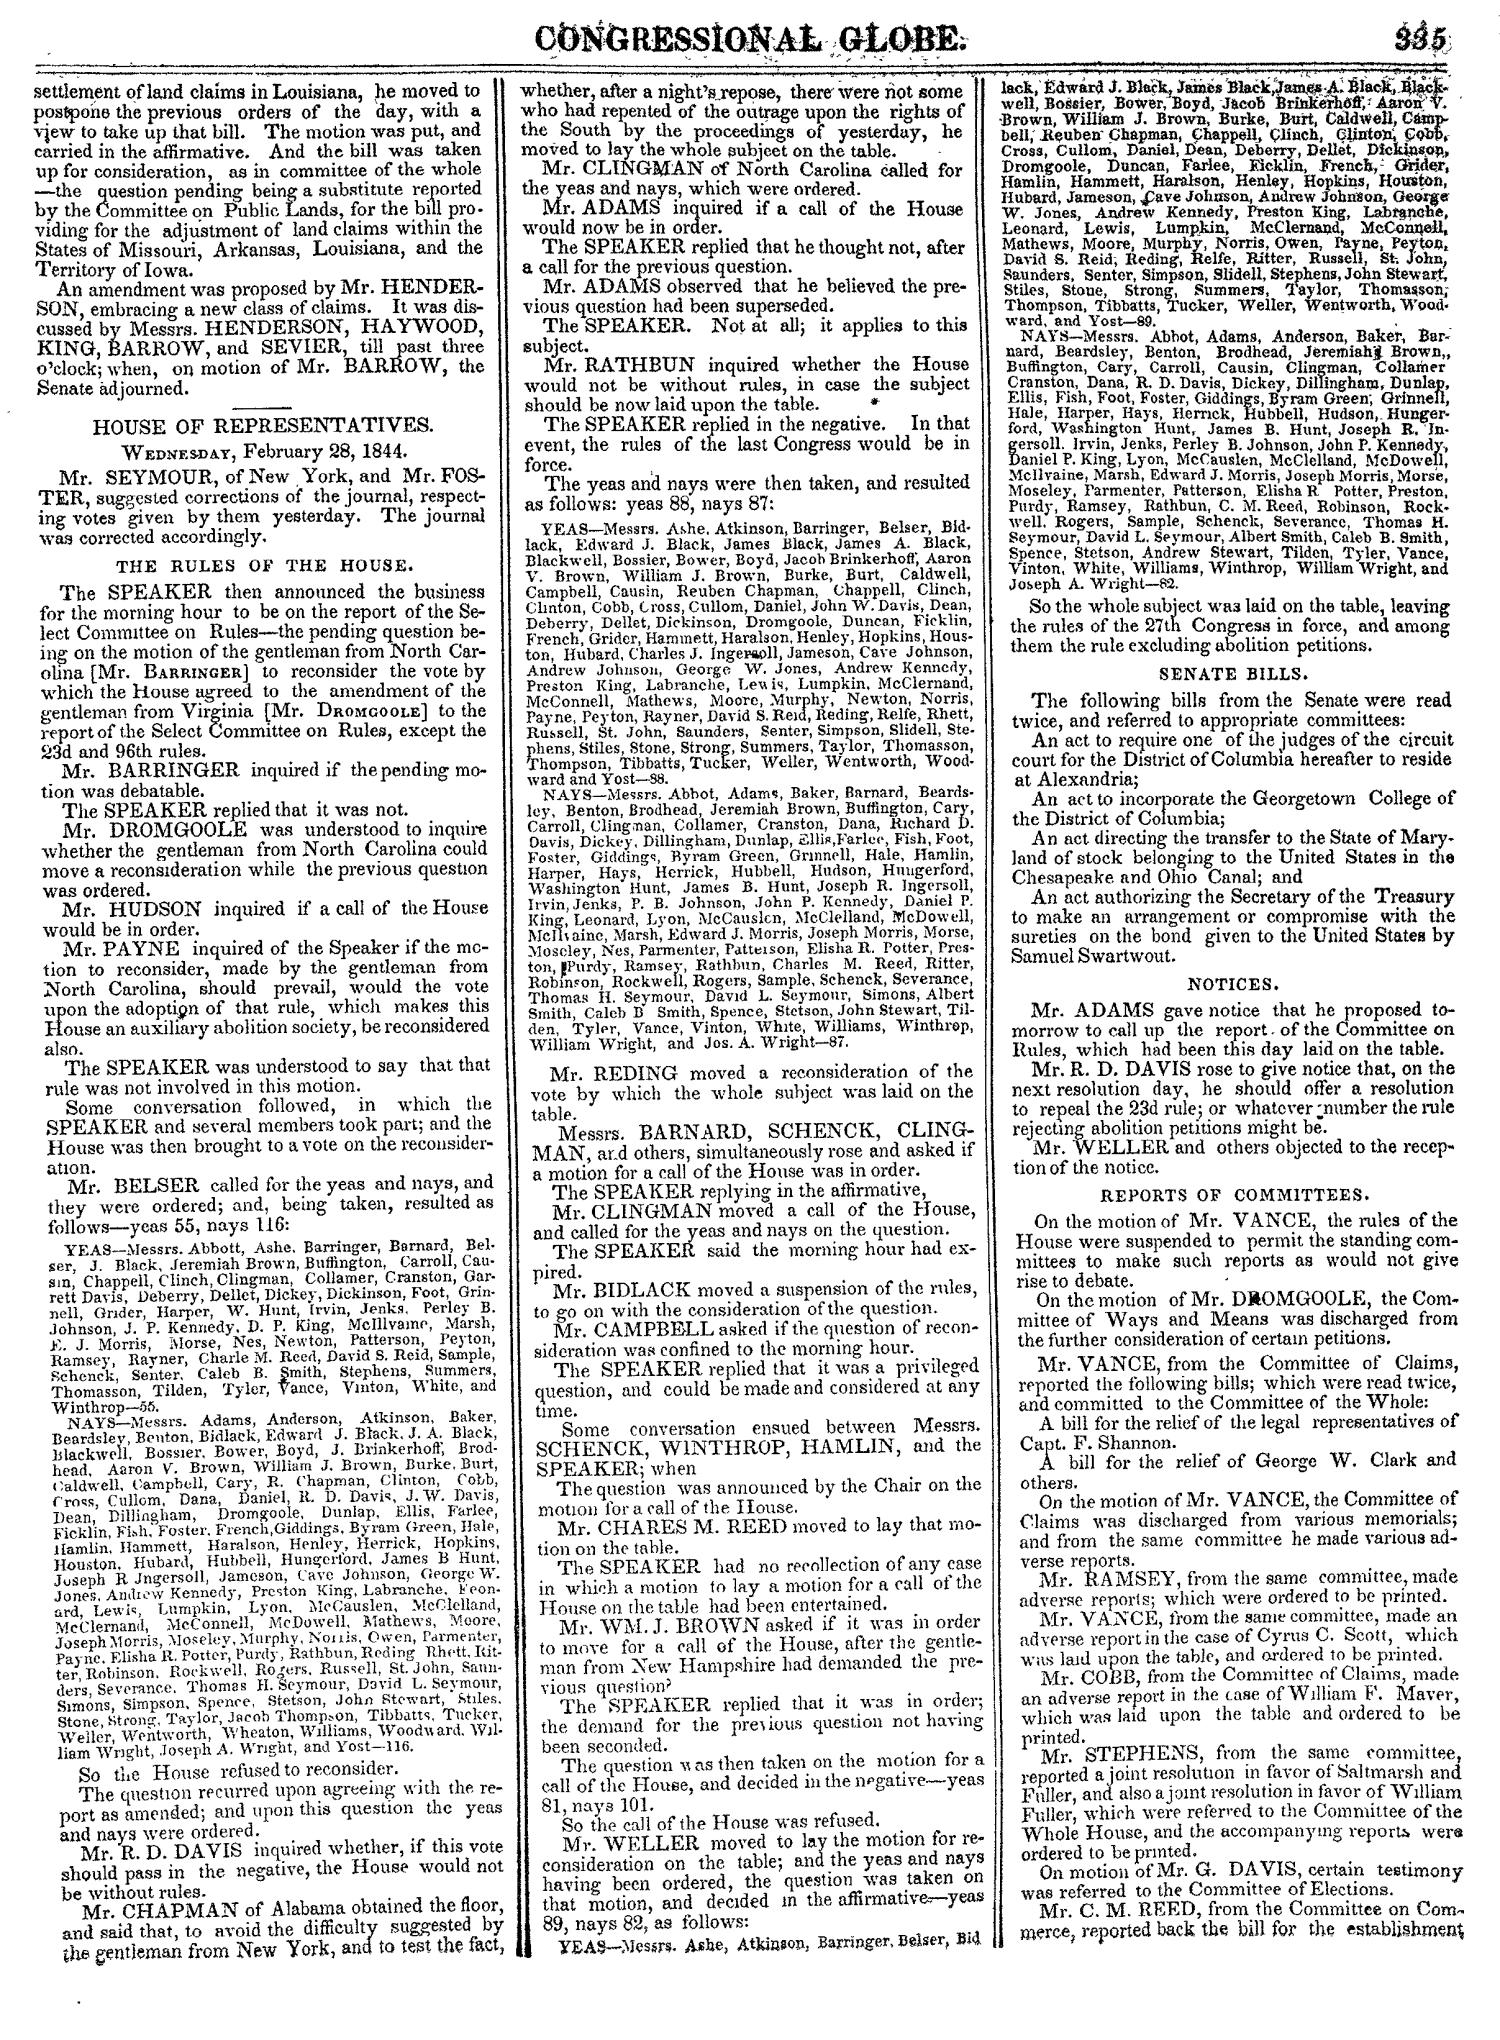 The Congressional Globe, Volume 13, Part 1: Twenty-Eighth Congress, First Session
                                                
                                                    335
                                                